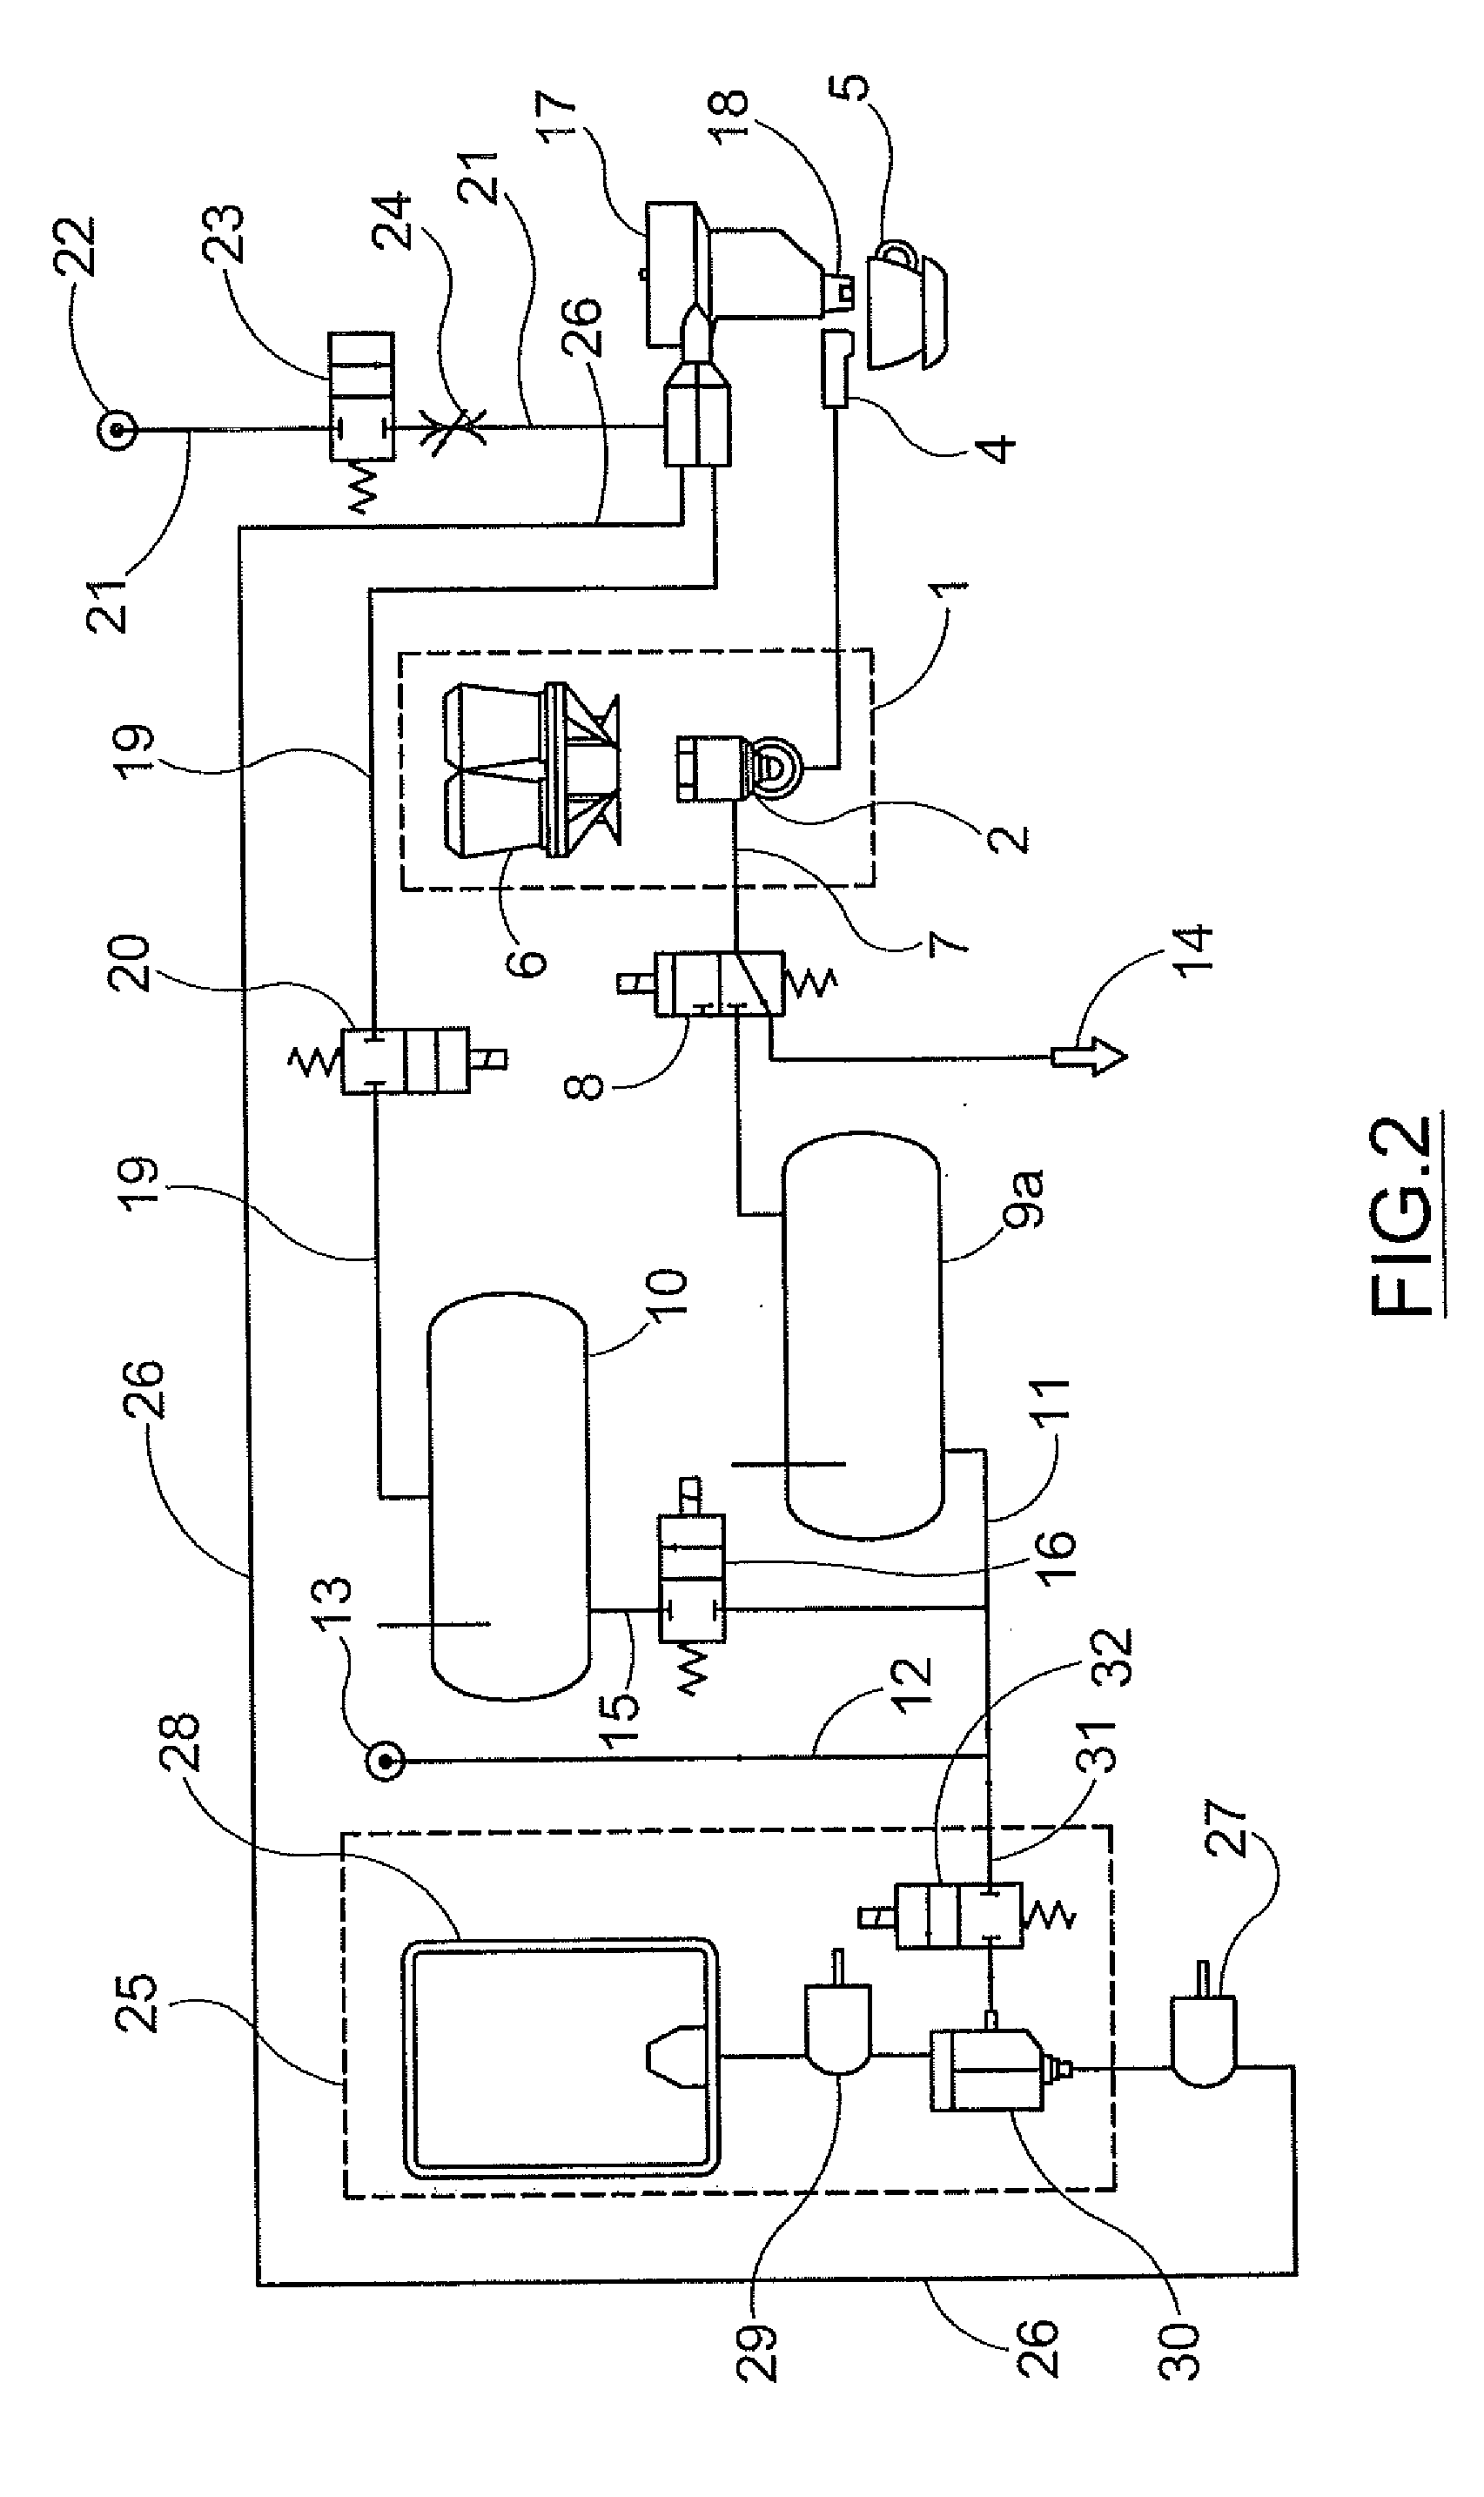 Apparatus and Method for Preparing Milk under Various Temperature and Consistency Conditions in a Coffee Machine for Forming Various Types of Beverages